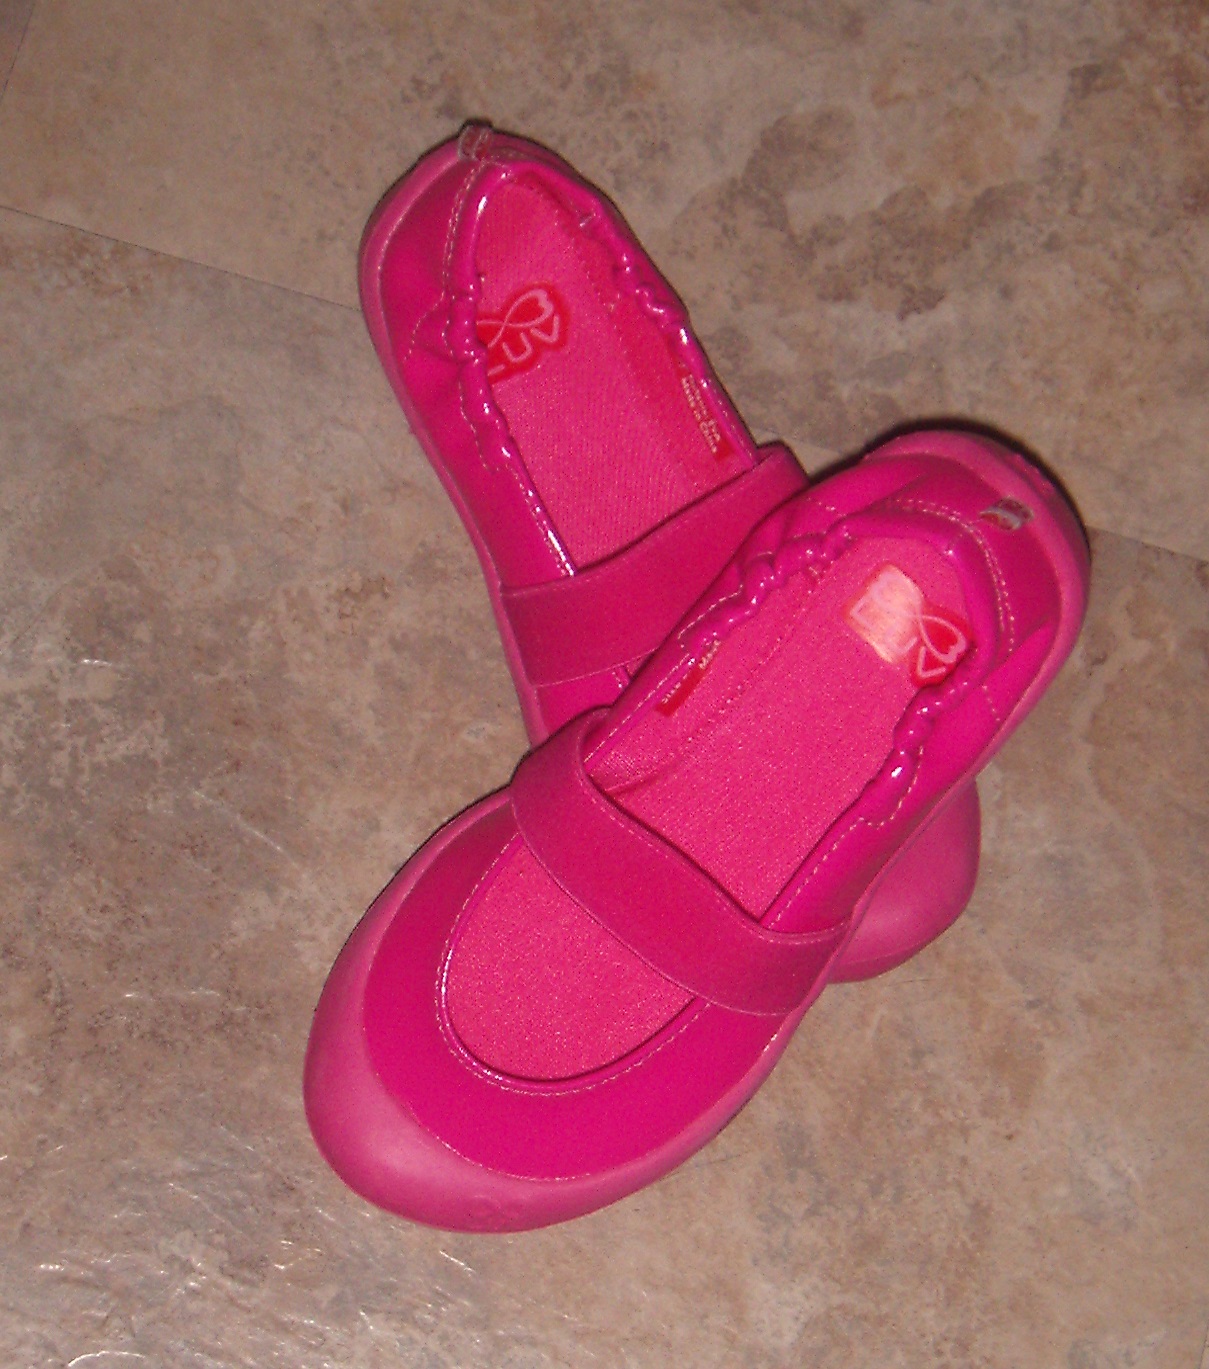 Mommie of 2: Luv Footwear Review and #Giveaway 8/5 CLOSED